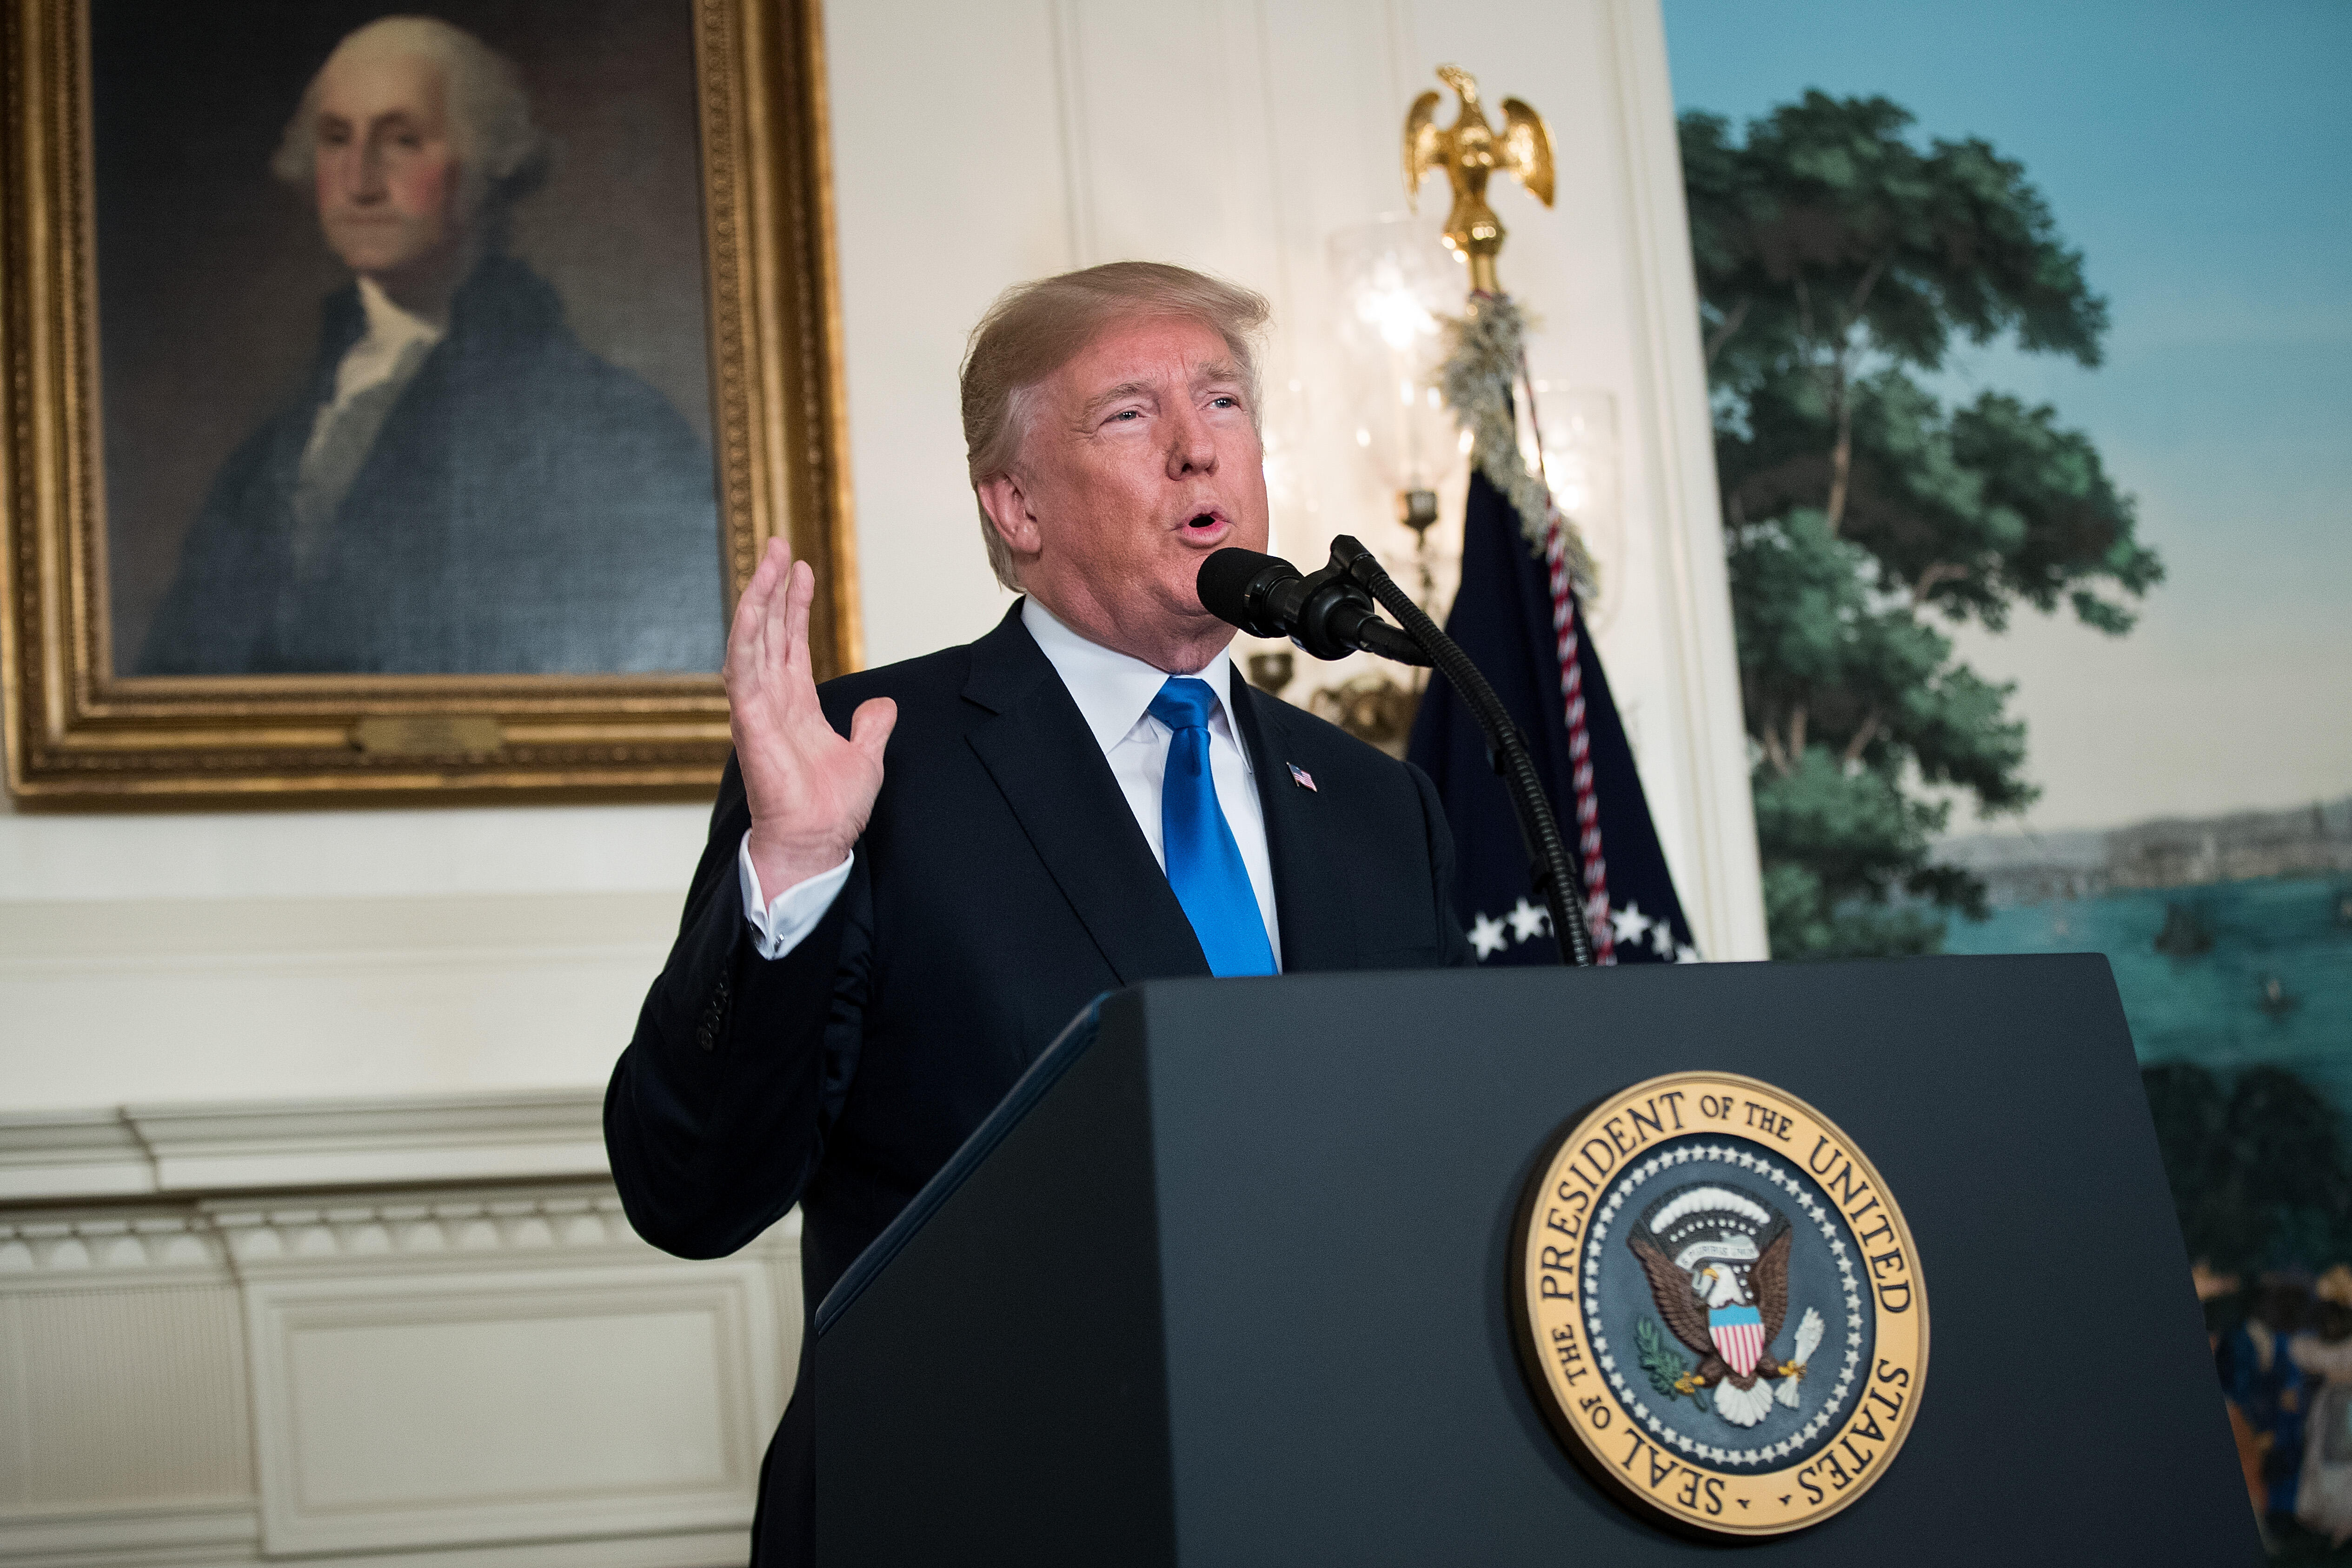 WASHINGTON, DC - OCTOBER 13: U.S. President Donald Trump makes a statement on the administration's strategy for dealing with Iran, in the Diplomatic Reception Room in the White House, October 13, 2017, in Washington, DC. President Trump stated that the Iran nuclear deal is not in the best interests of the security of the United States, but stopped short of withdrawing from the 2015 agreement. (Photo by Drew Angerer/Getty Images)